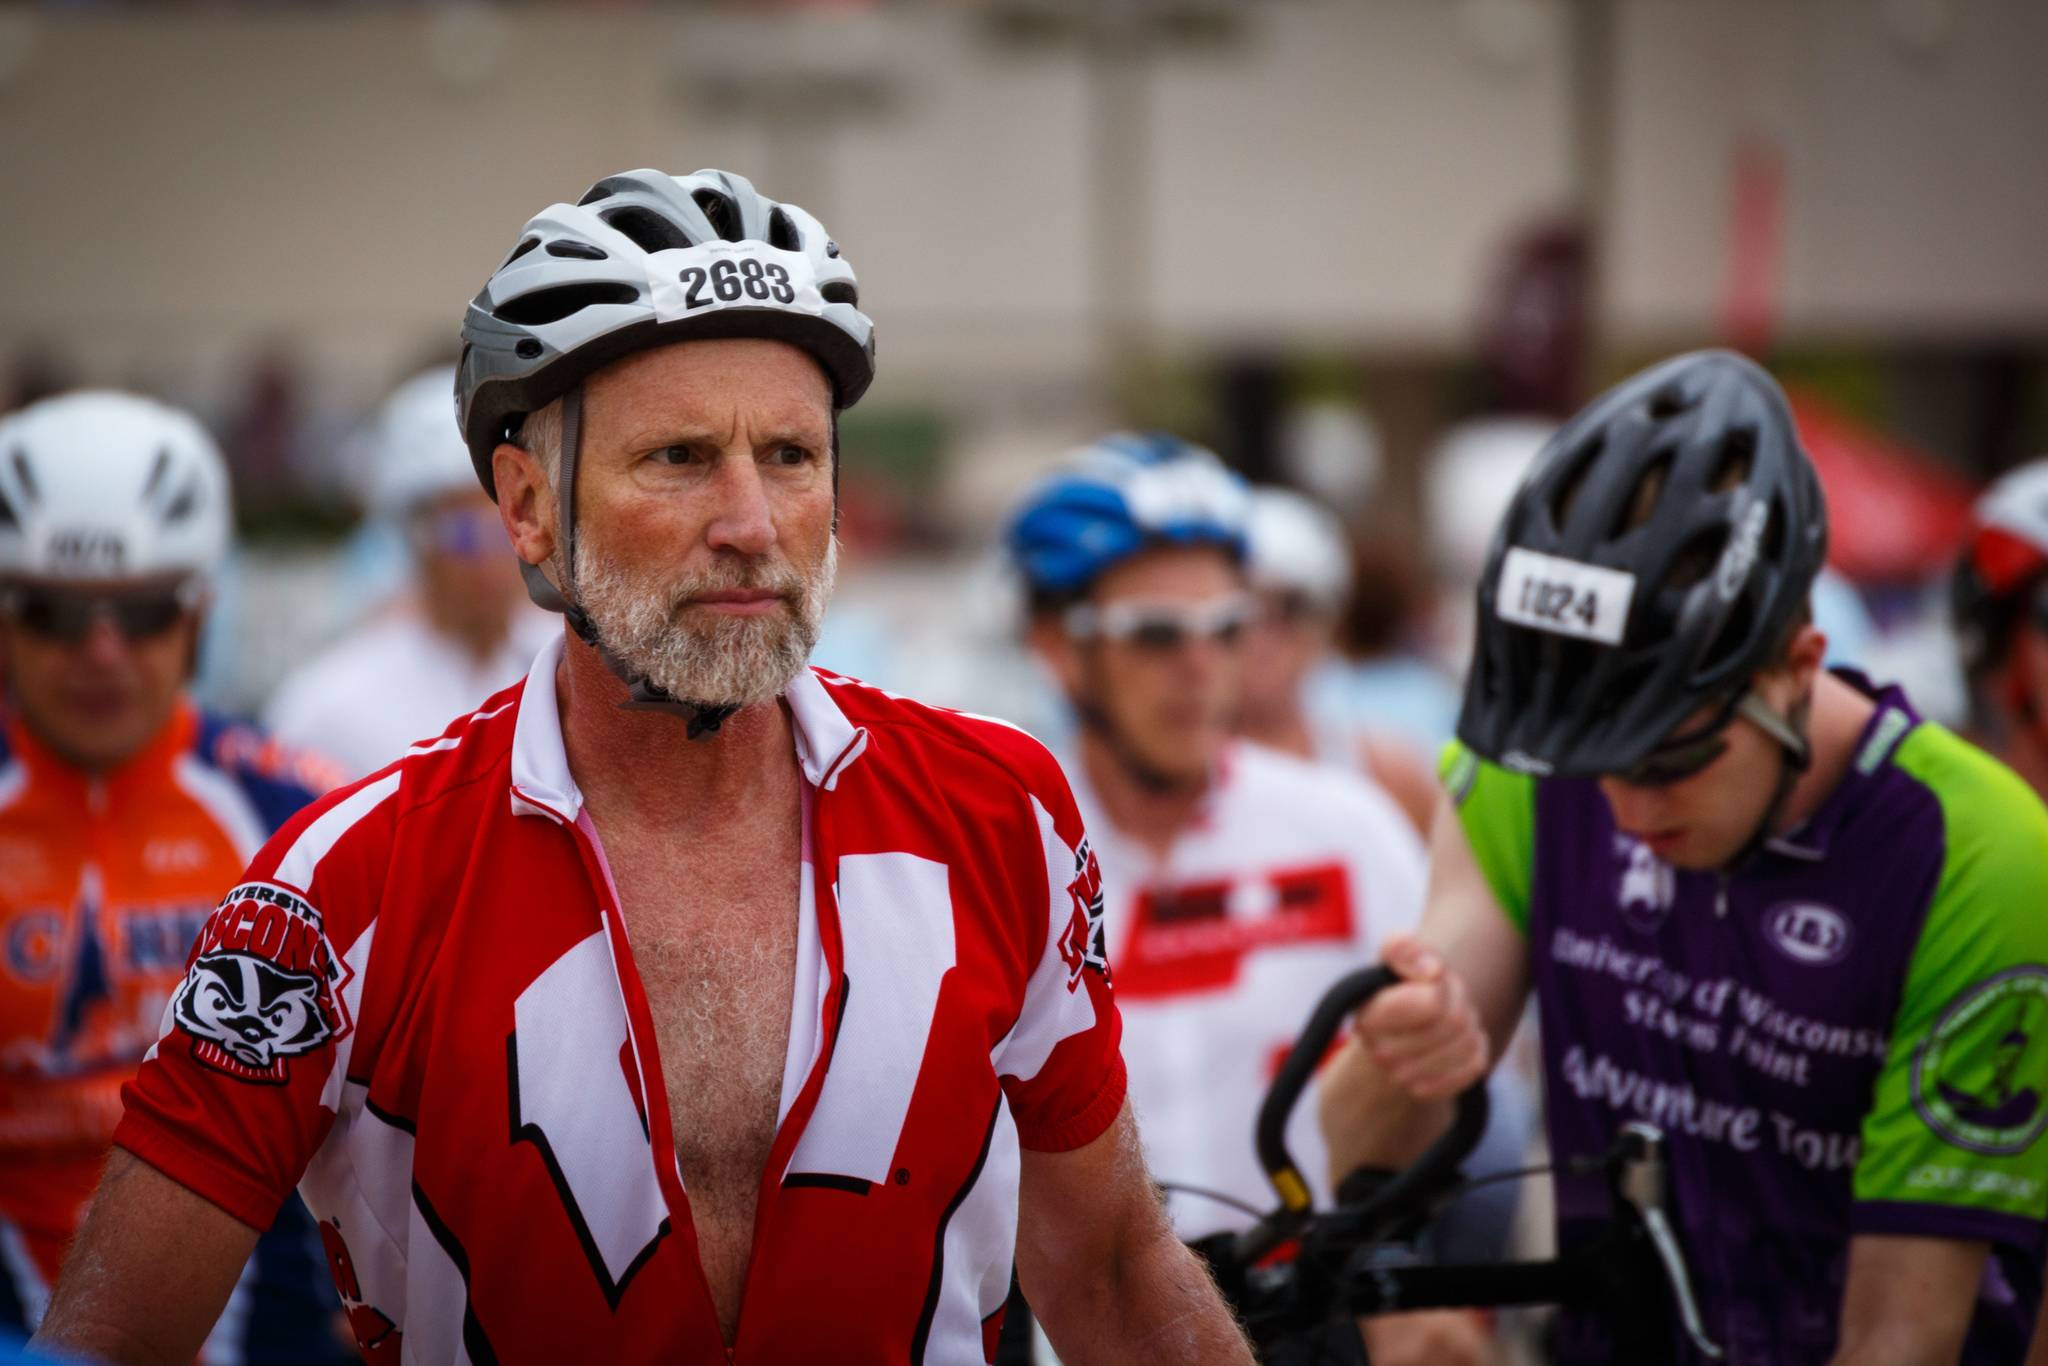 Ironman: a healthier kind of crisis for middle-aged men